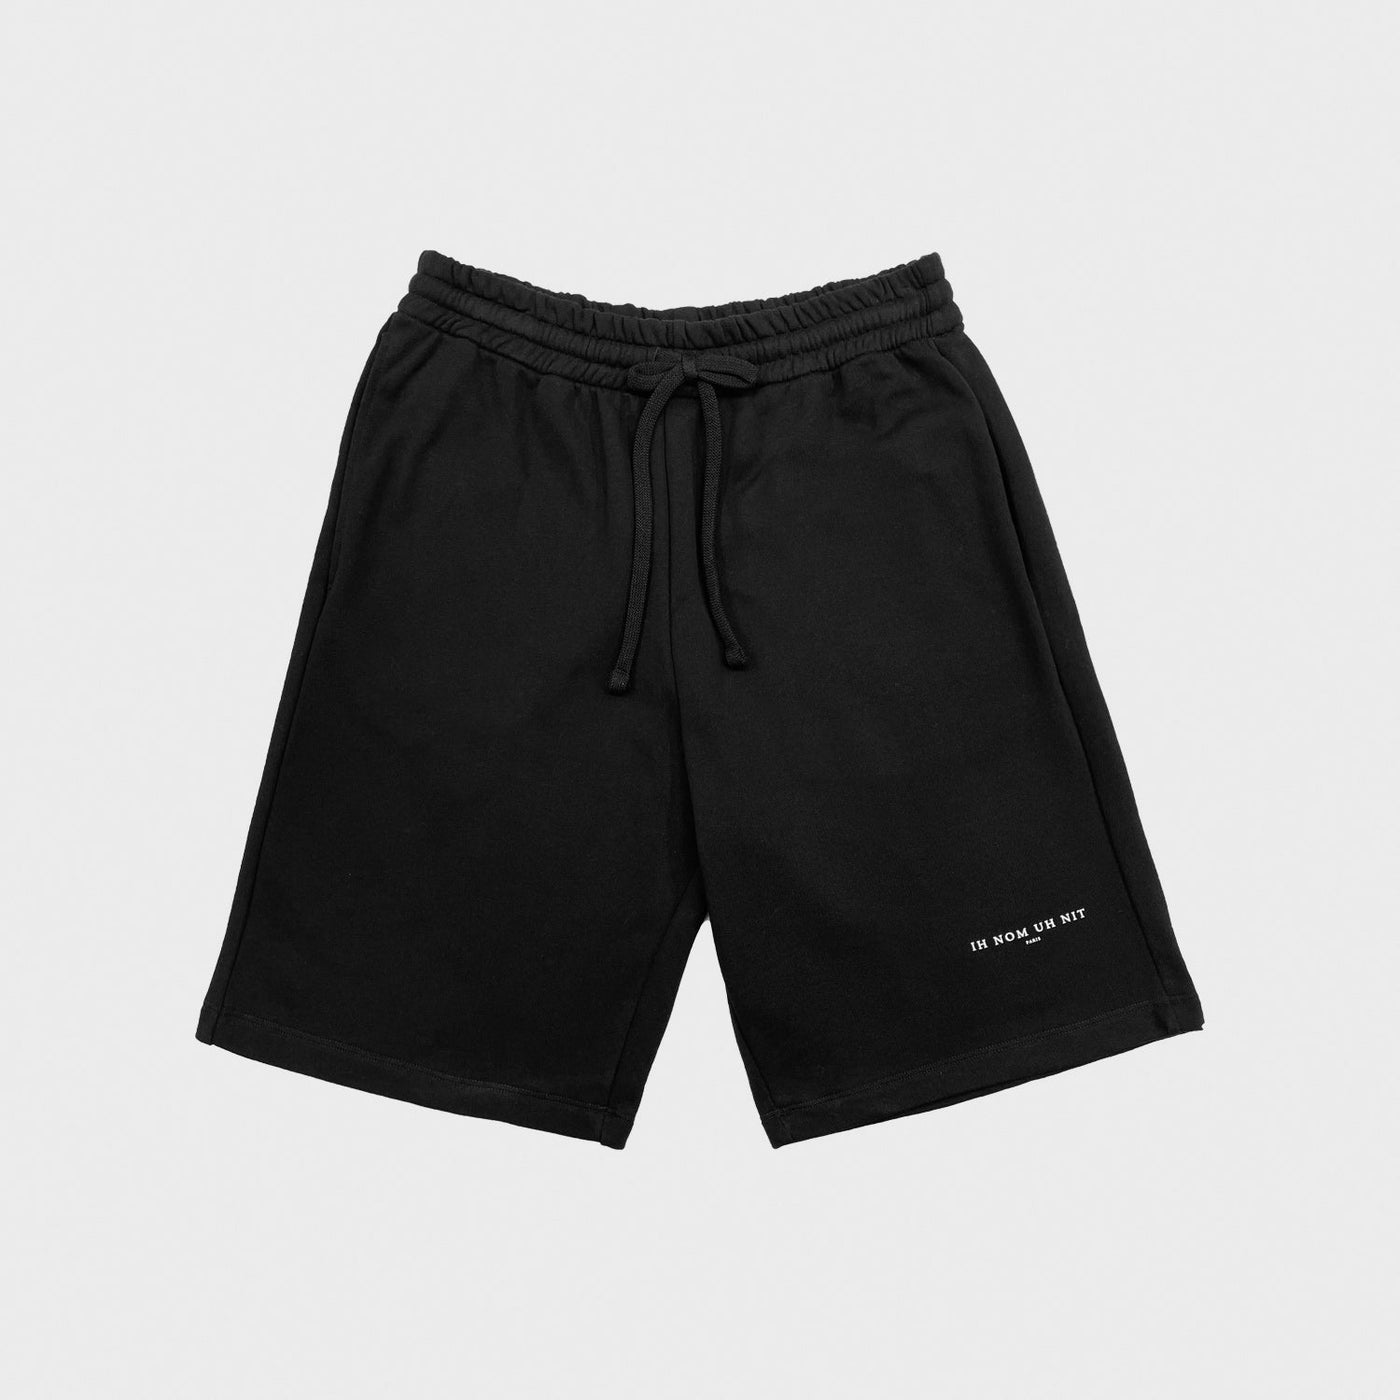 Ih Nom Uh Nit Shorts with small logo